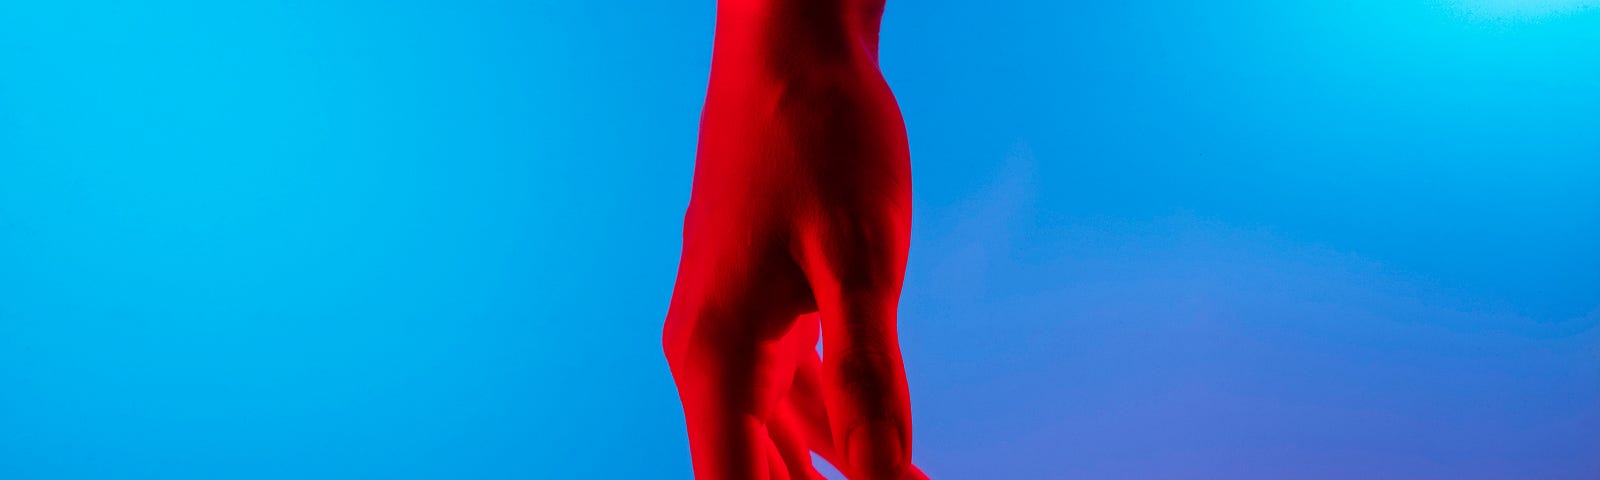 A red hand hanging limp in front of a blue screen